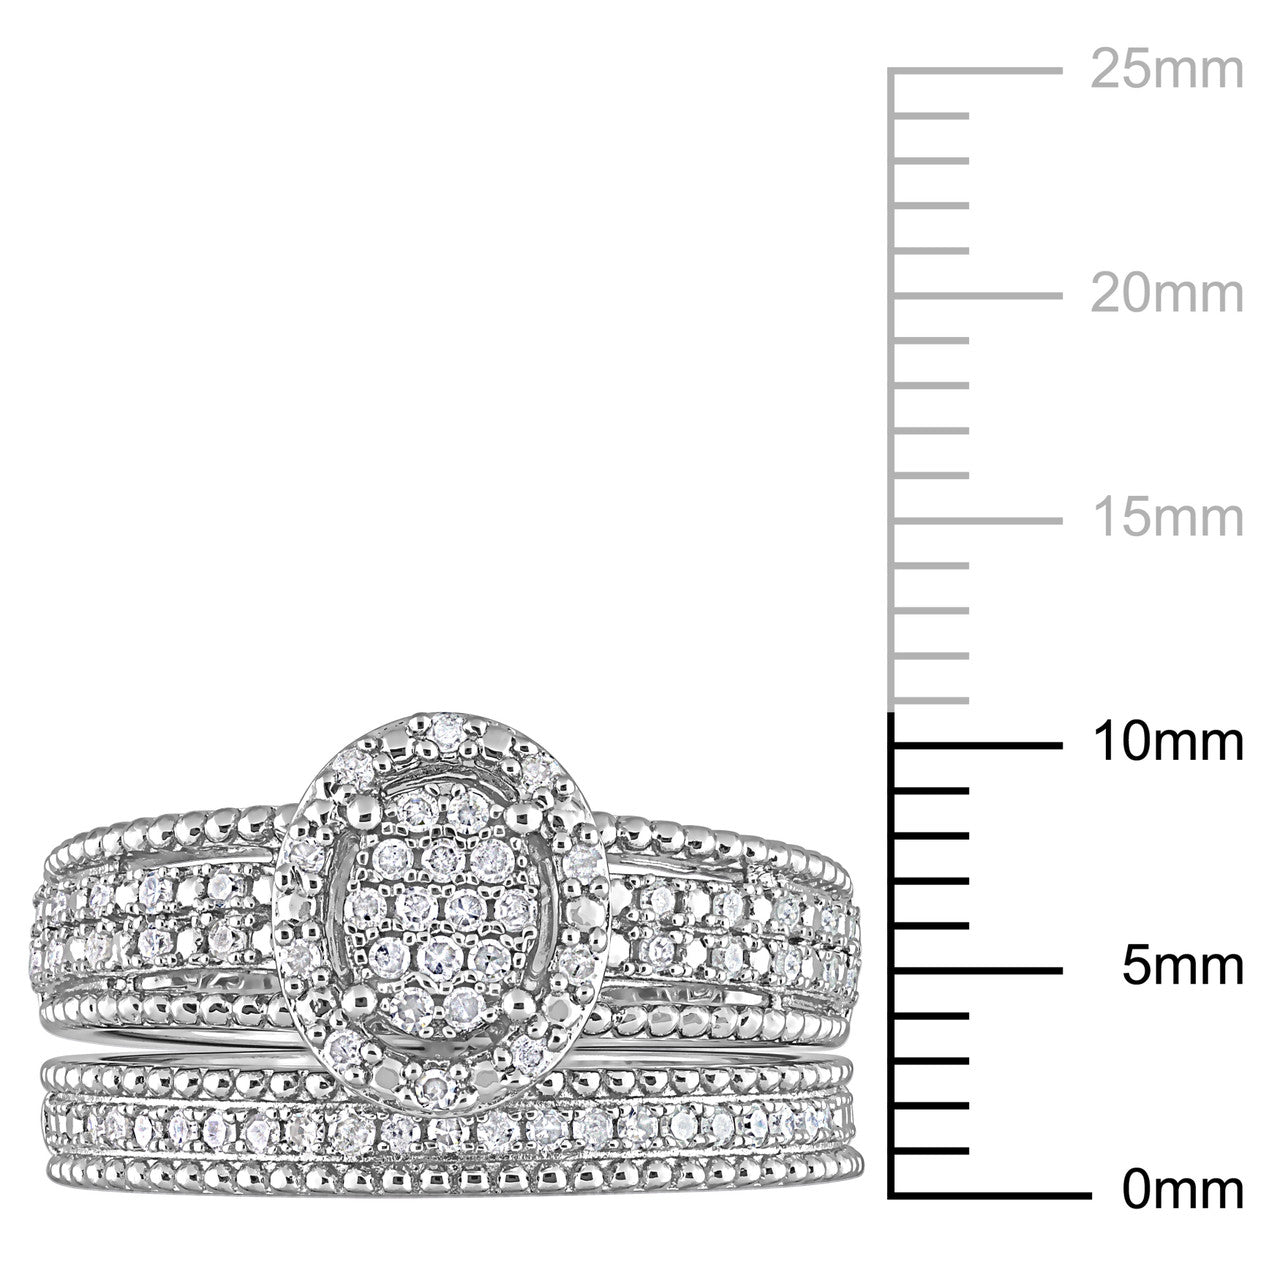 Ice Jewellery 1/3 CT Diamond Engagement Ring in Sterling Silver - 75000005731 | Ice Jewellery Australia